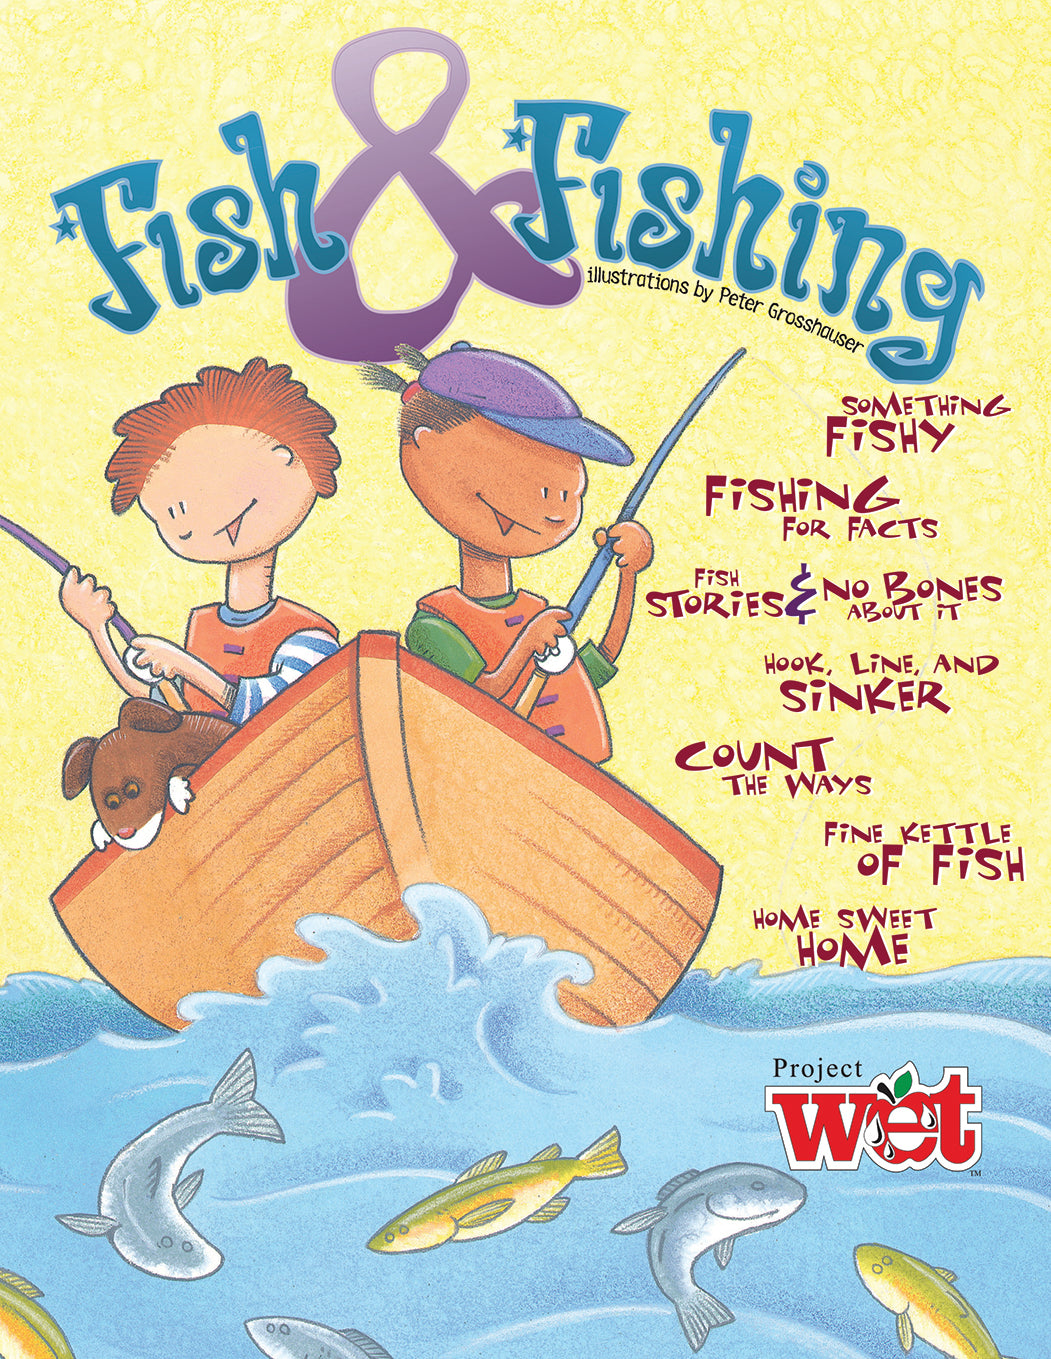 Fish and Fishing KIDs Activity Booklet PDF EBOOK